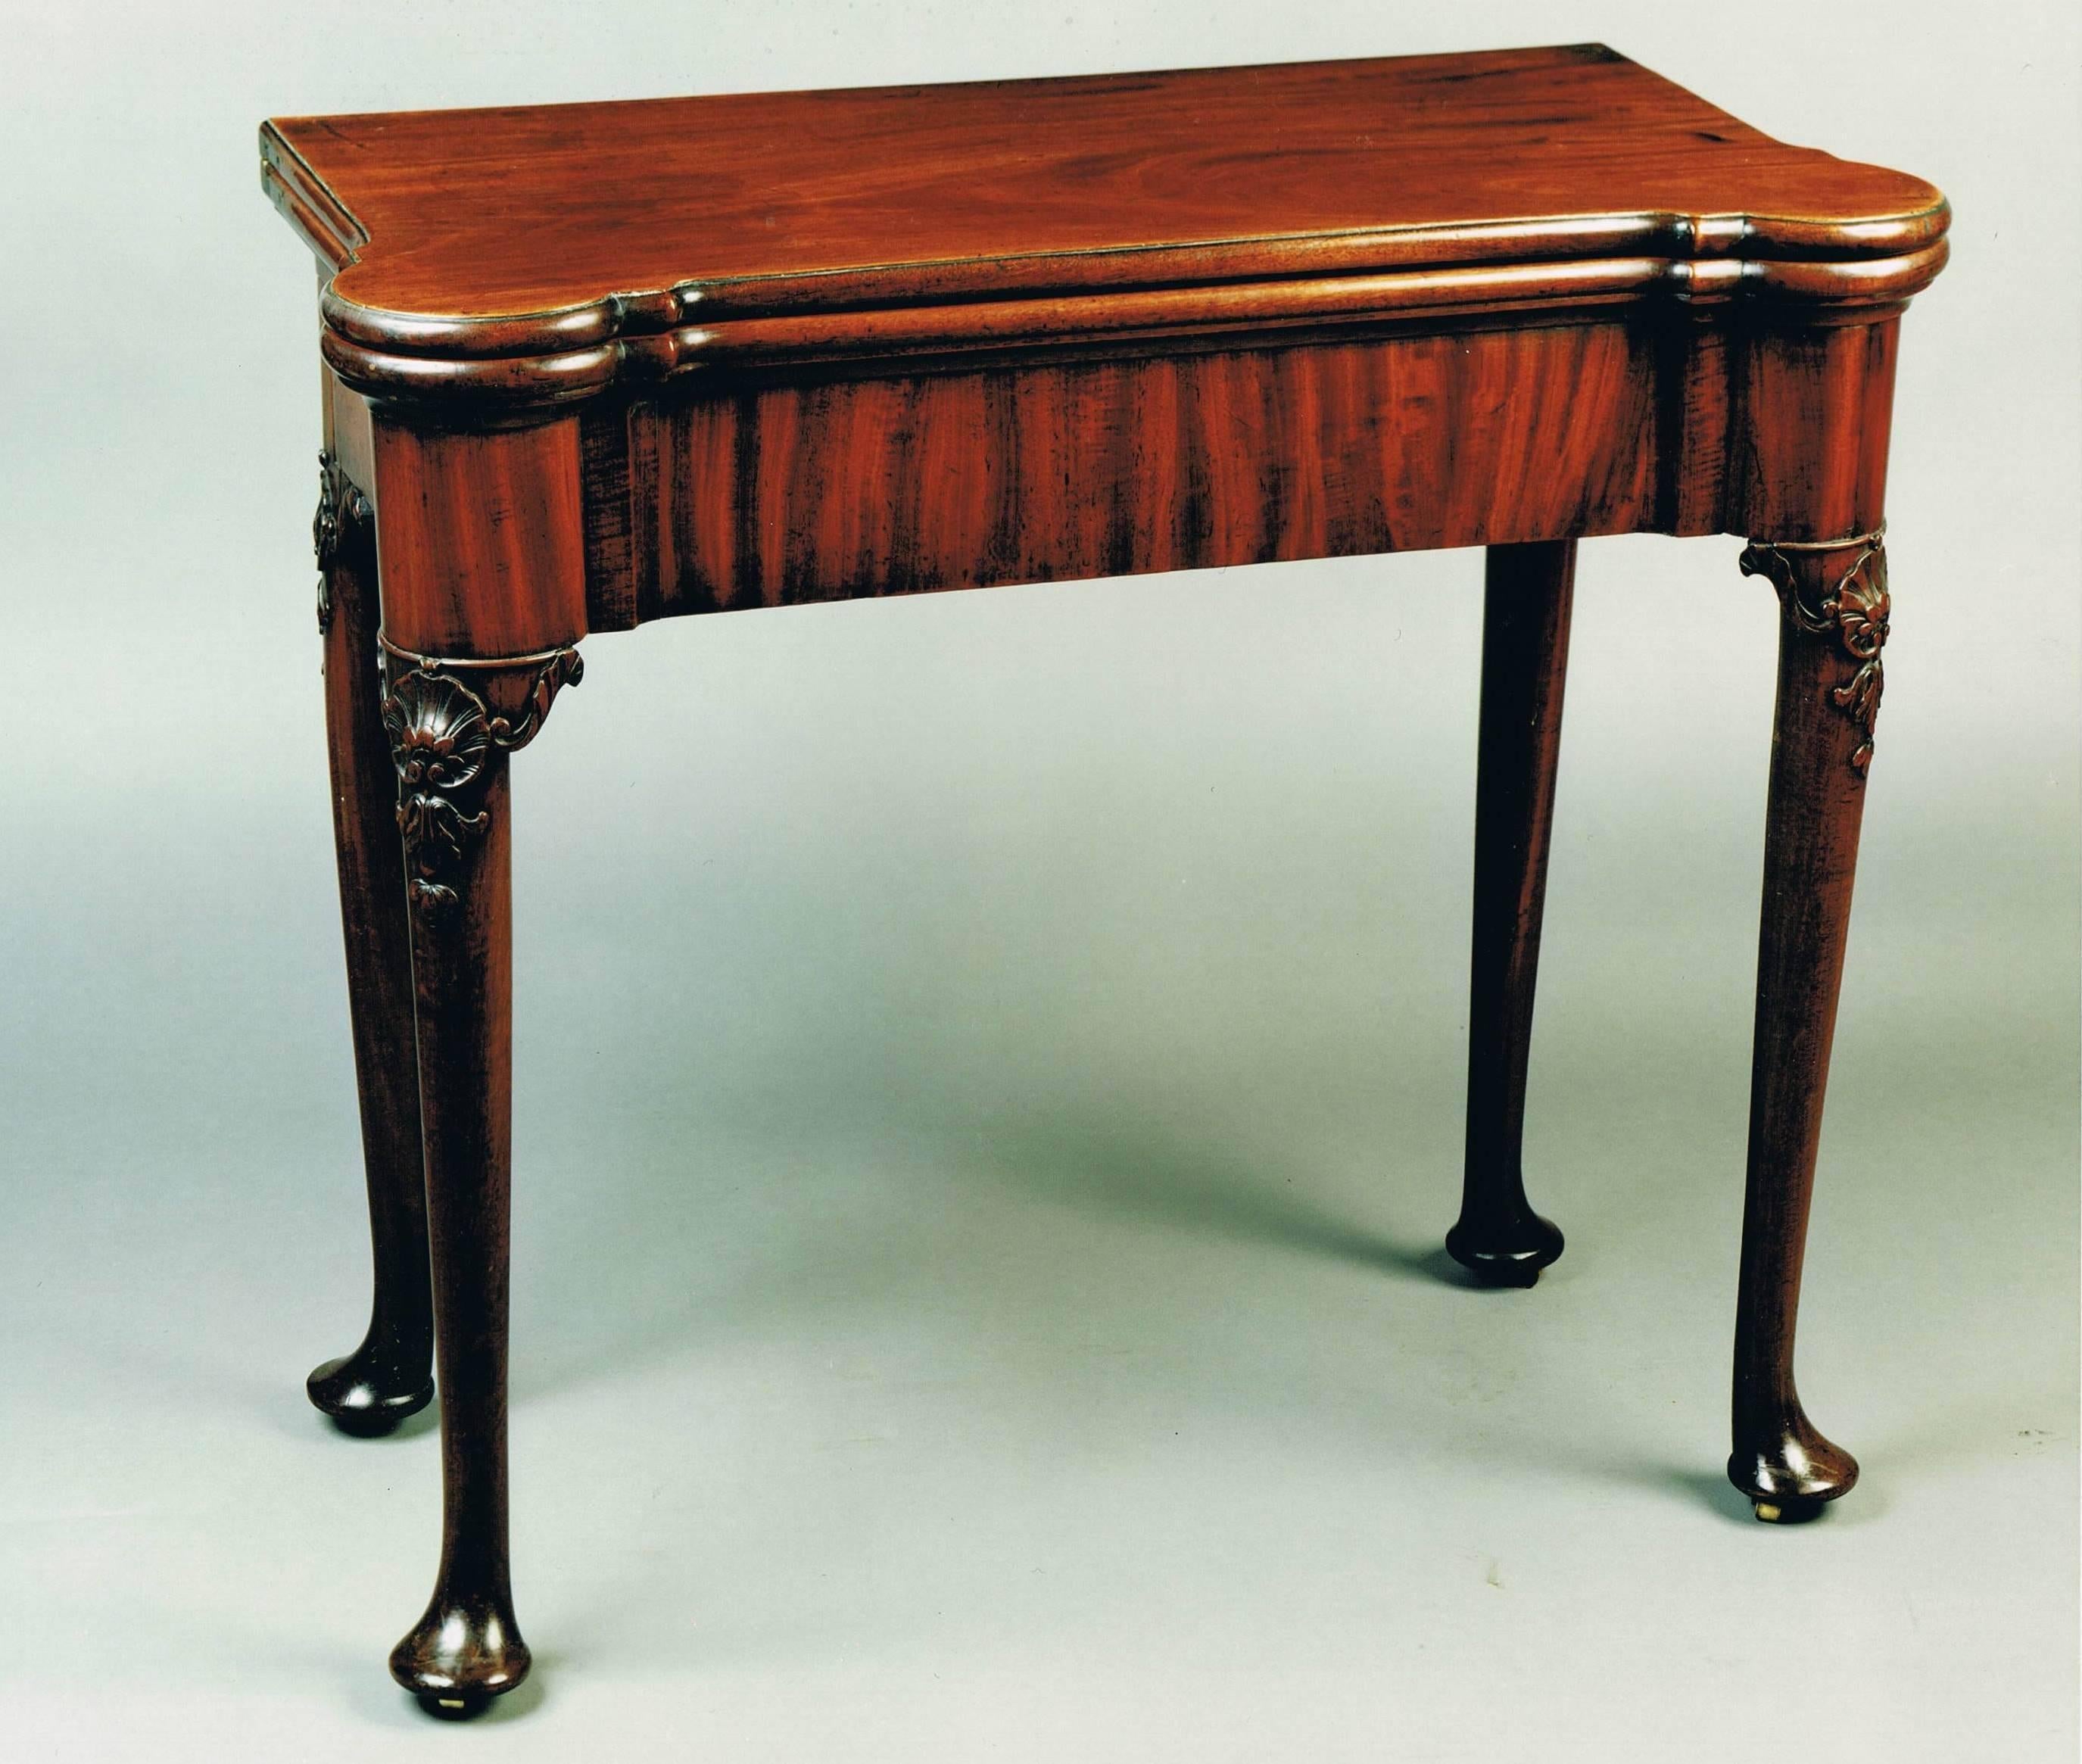 A fine and most elegant George II period two tier mahogany card table. The rounded rectangular top opens to reveal a baize, lined interior with guinea wells and places for candlesticks, there is also an unusual feature of a drawer. The second tier